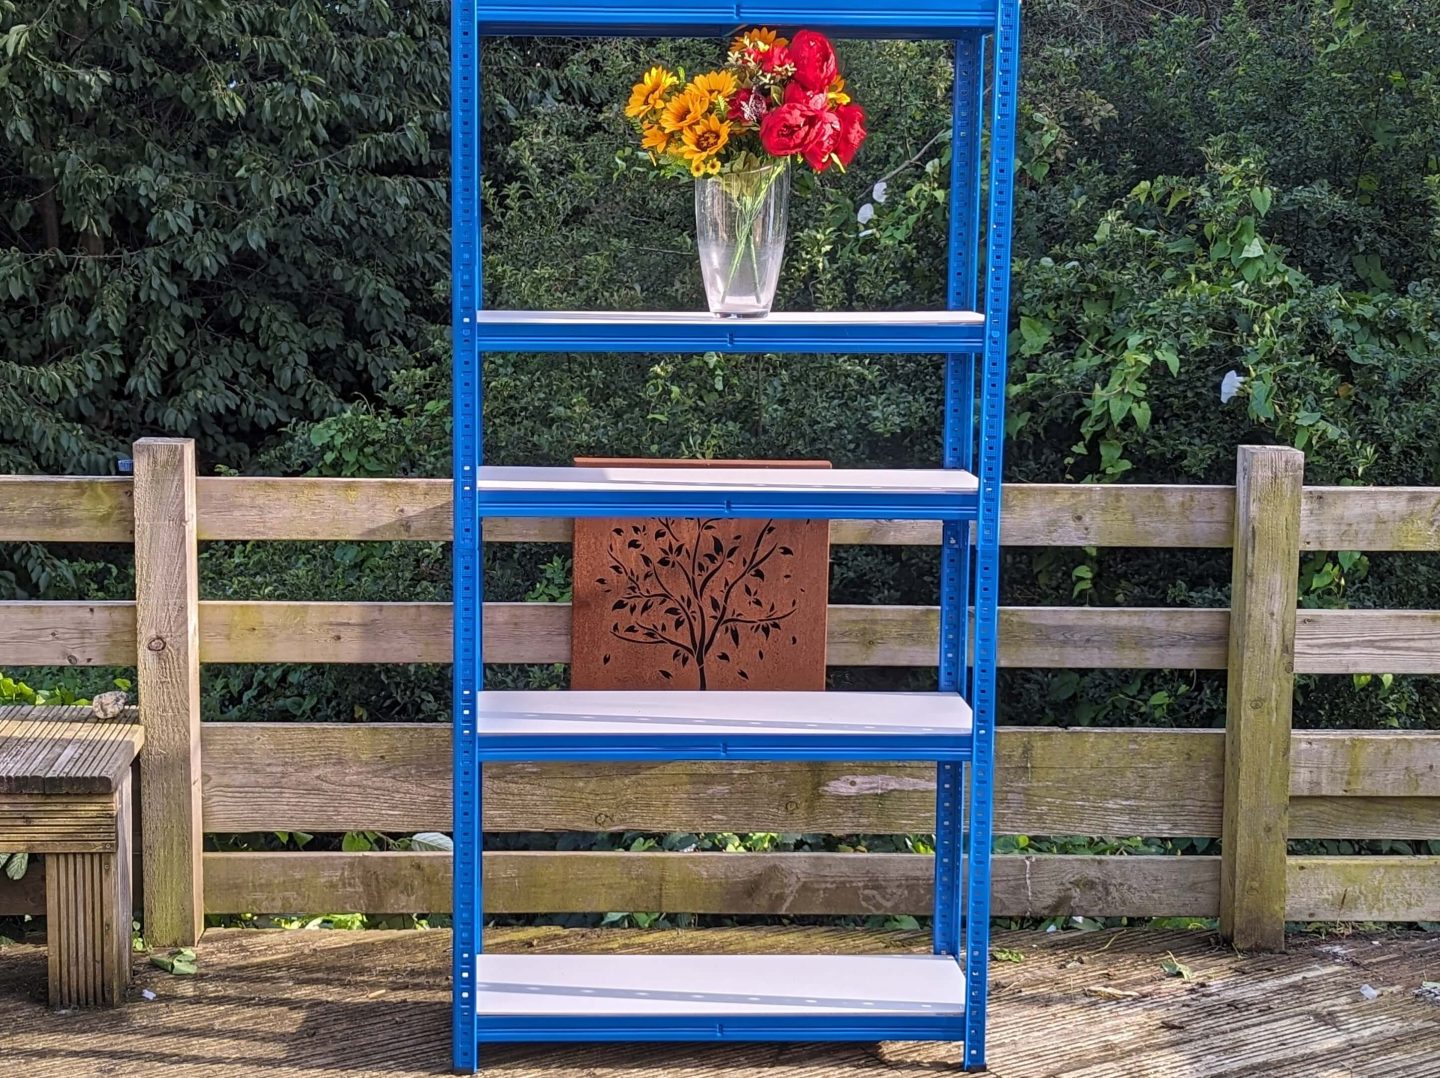 Blue-edged shelving unit displayed on a wooden decking with a vase of red and yellow flowers on the top shelf